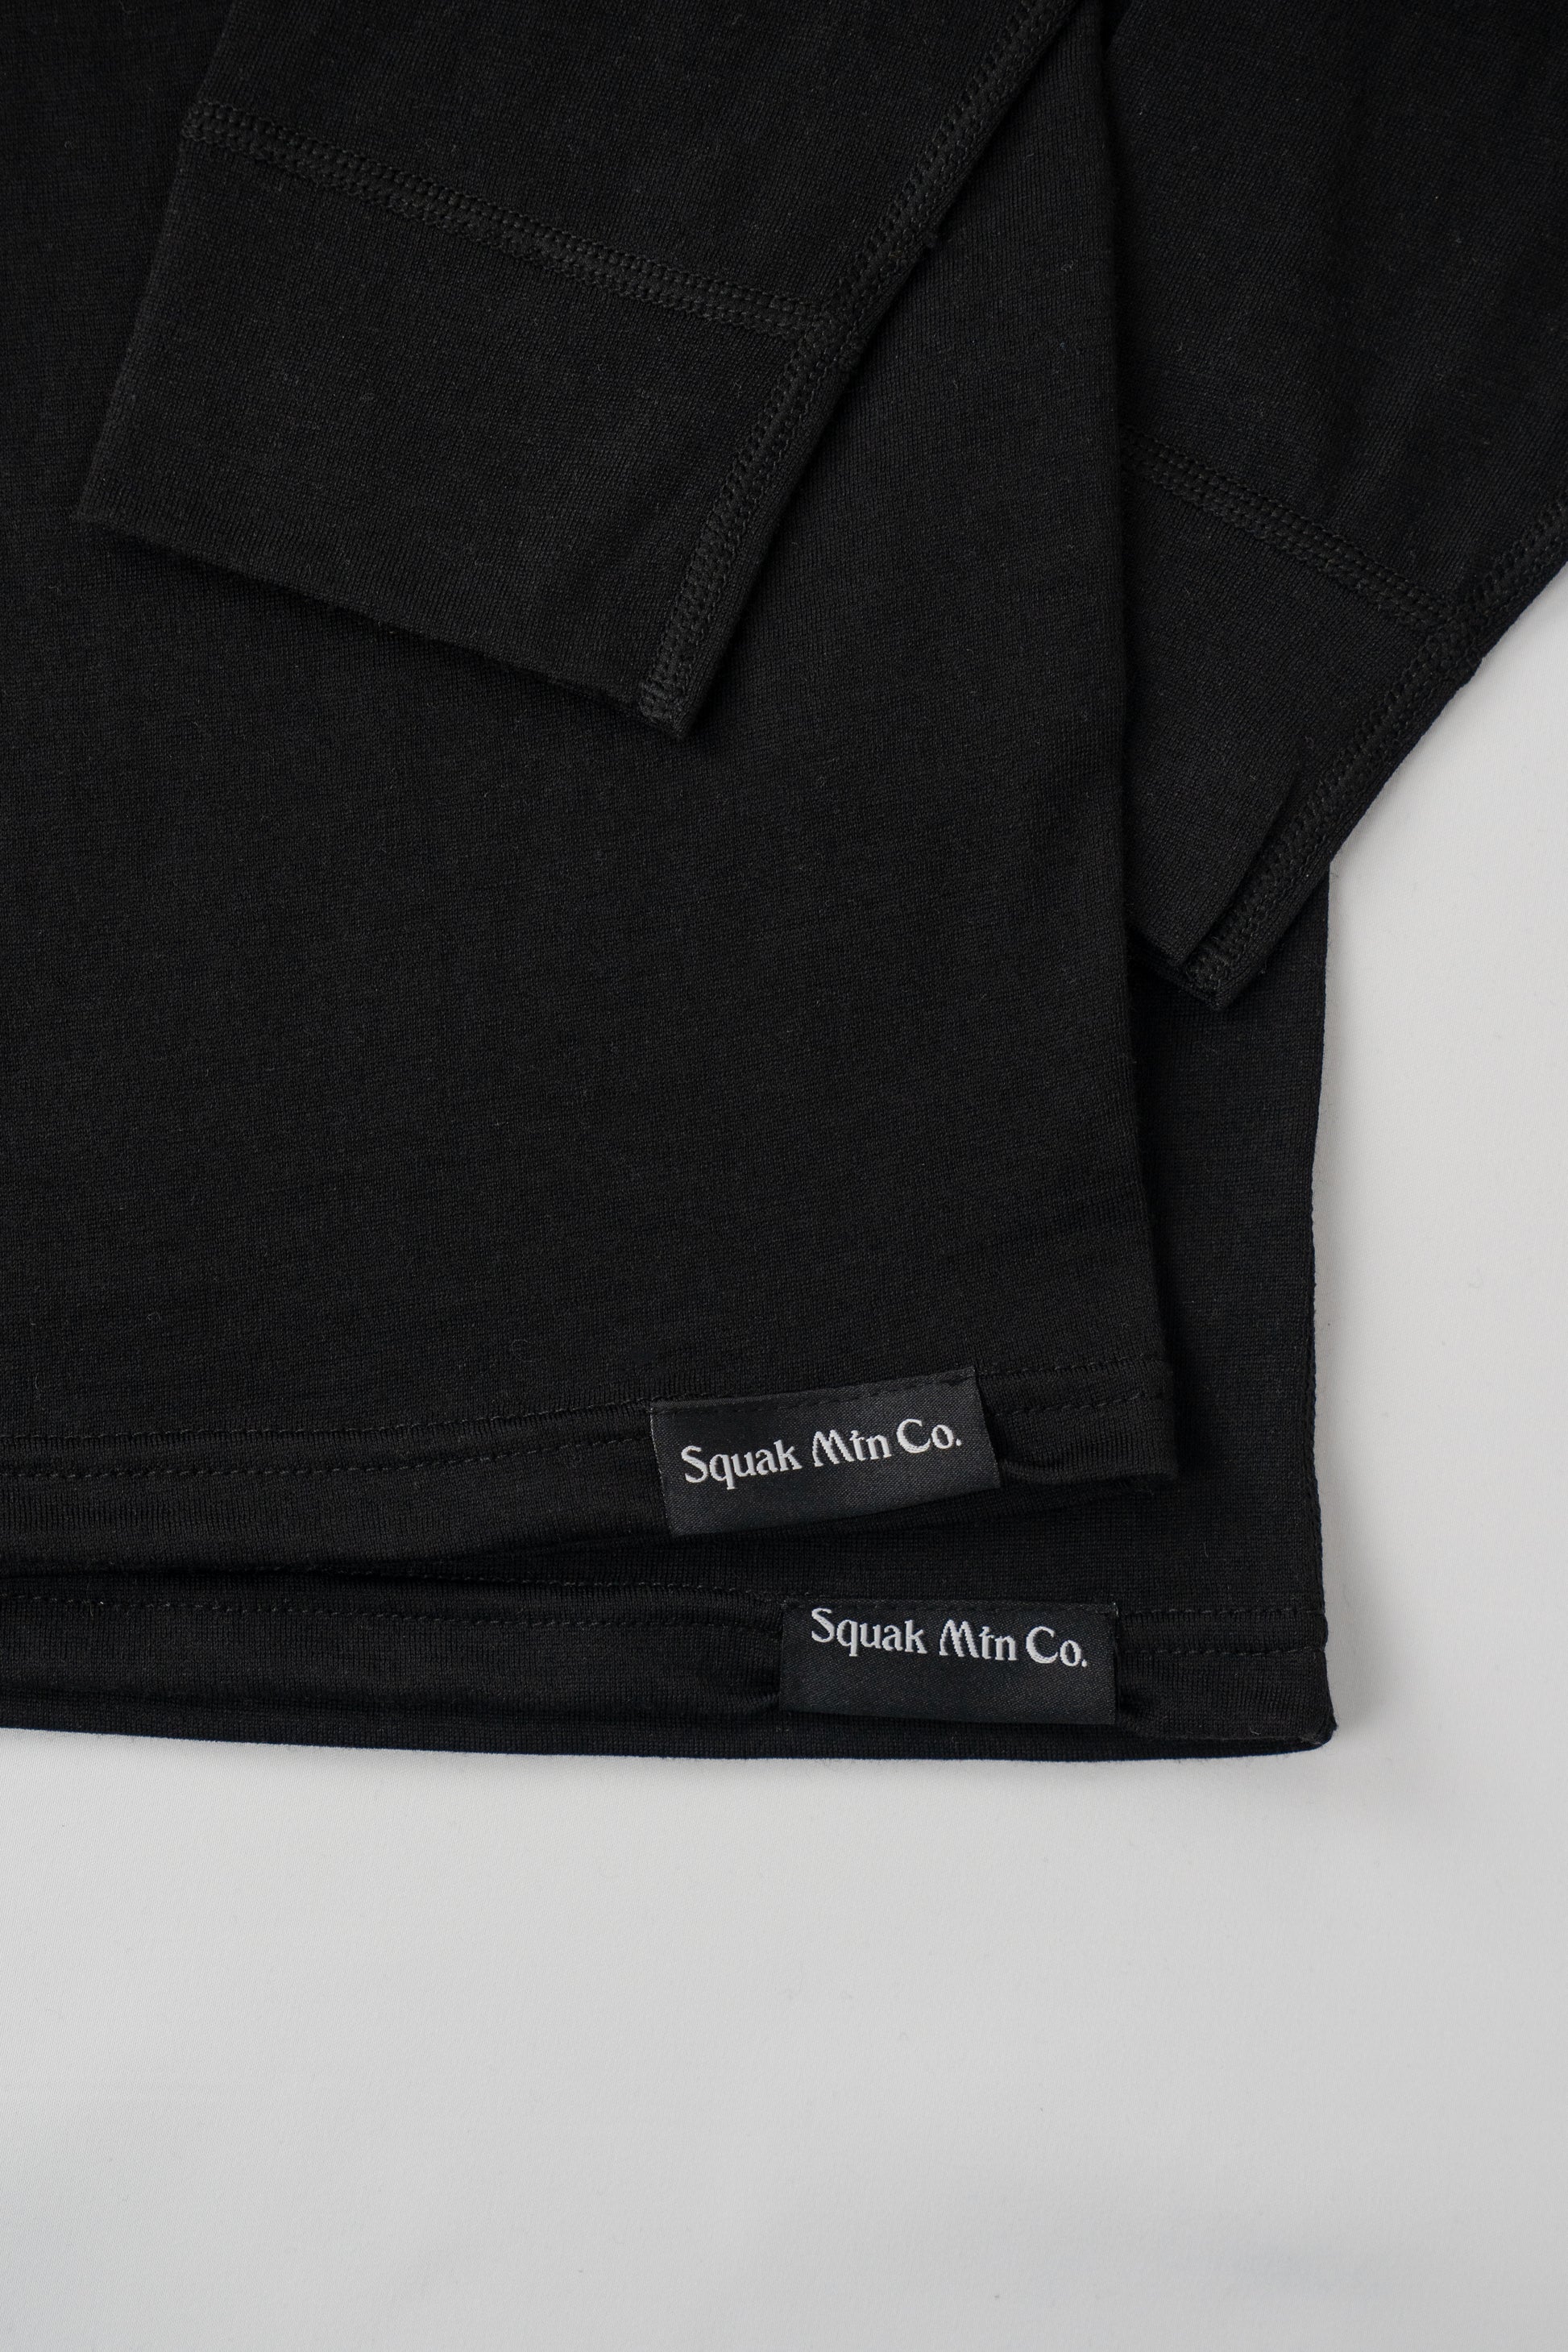 Logo on 2 stacked womens black wool base layer hoodie from Squak Mountain Co.